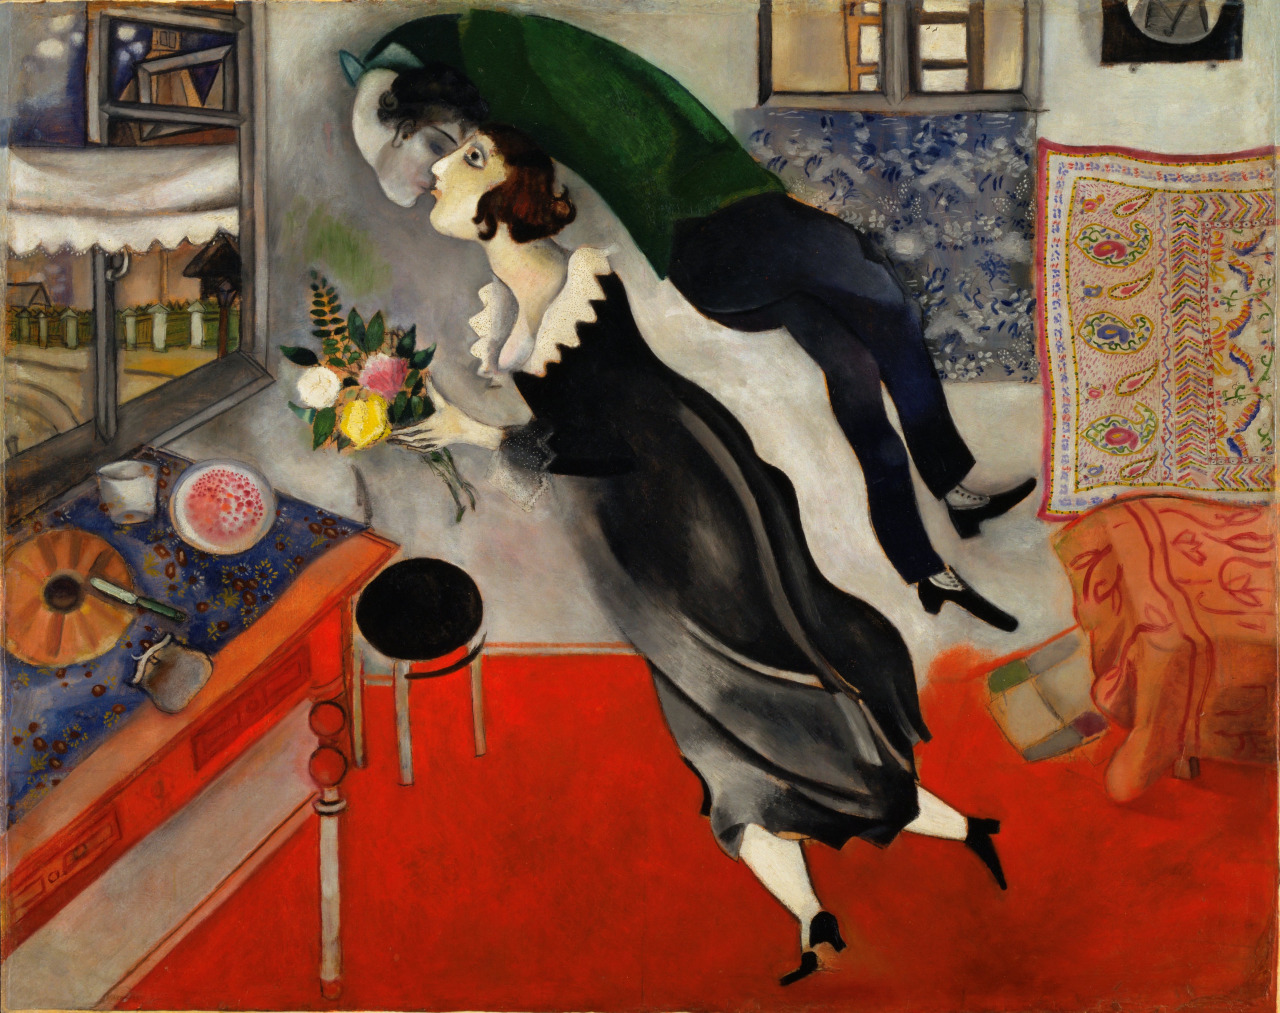 Bella Chagall’s “Burning Lights:” A Recollection